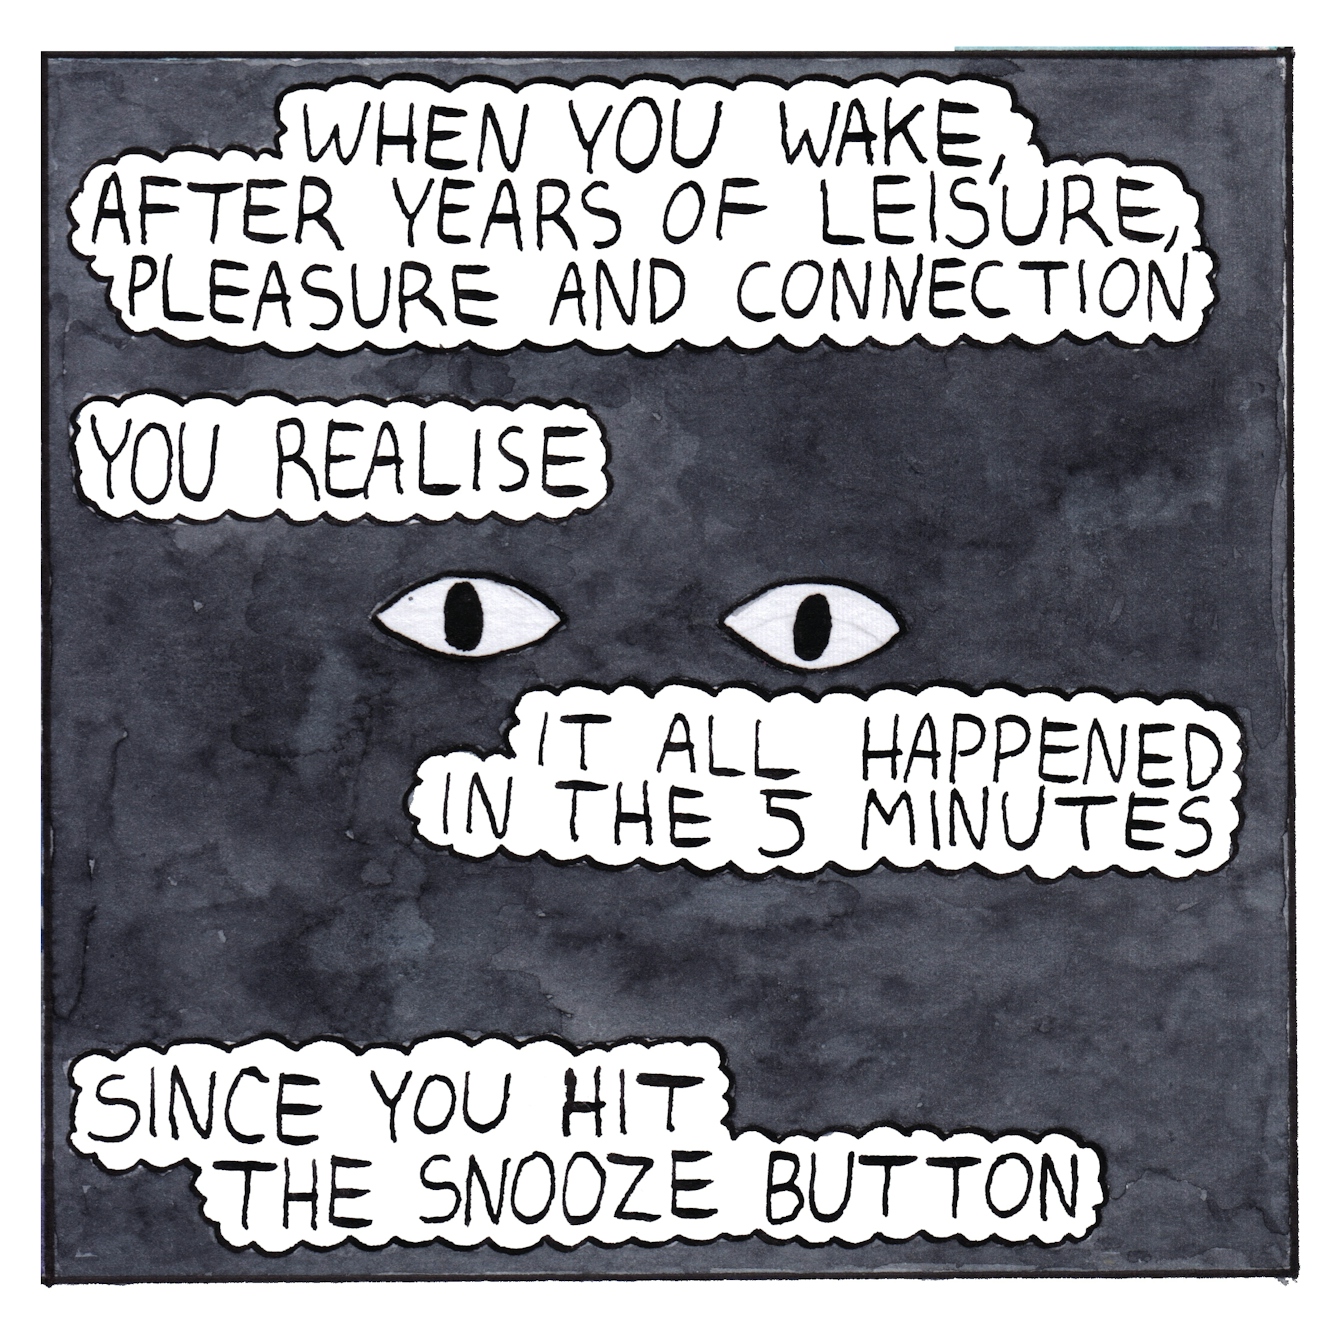 Panel six of a six-panel comic made with ink, watercolour and colour pencils: The panel is filled with a black background. A pair of open eyes float in the centre and four text bubbles above and below the eyes read: “When you wake, after years of leisure, pleasure and connection, you realise it all happened in the 5 minutes since you hit the snooze button”